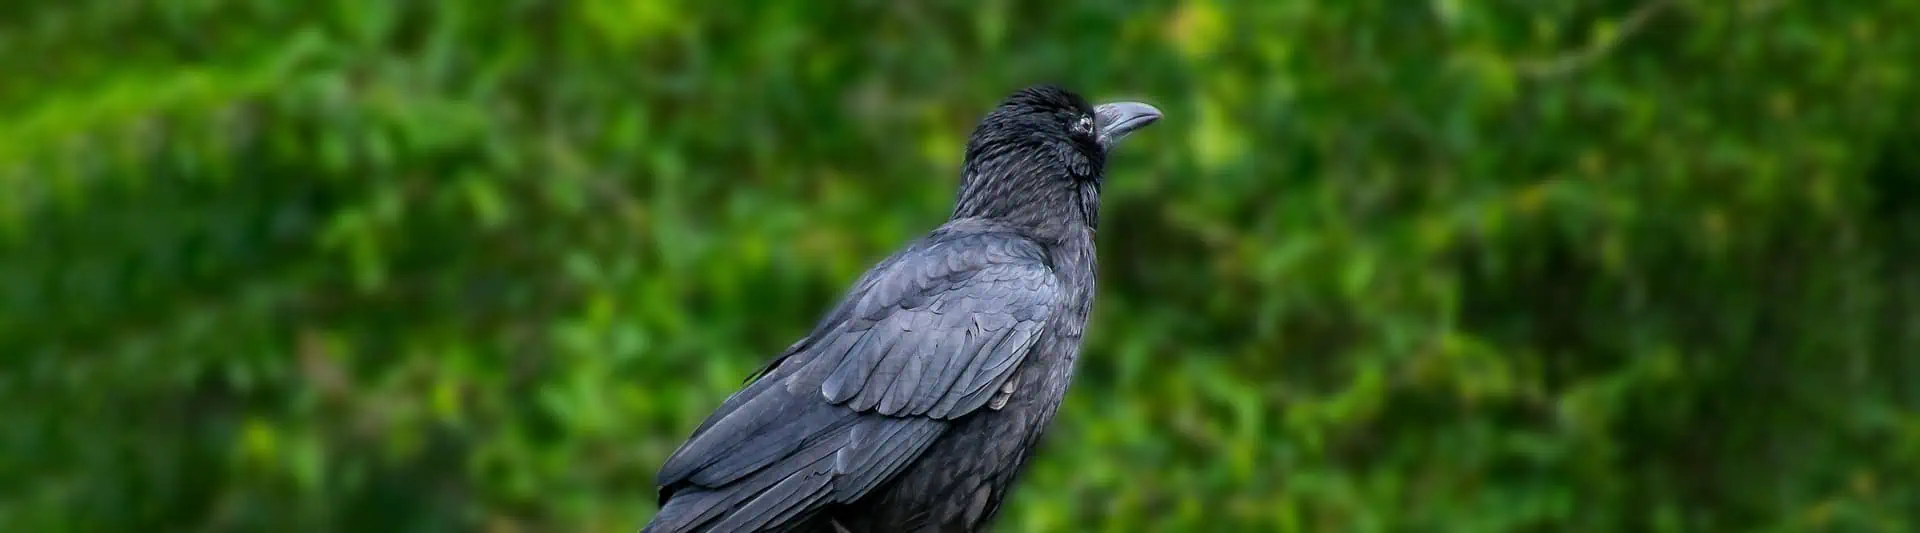 9 Types of Ravens: Species, Identification, and Photos